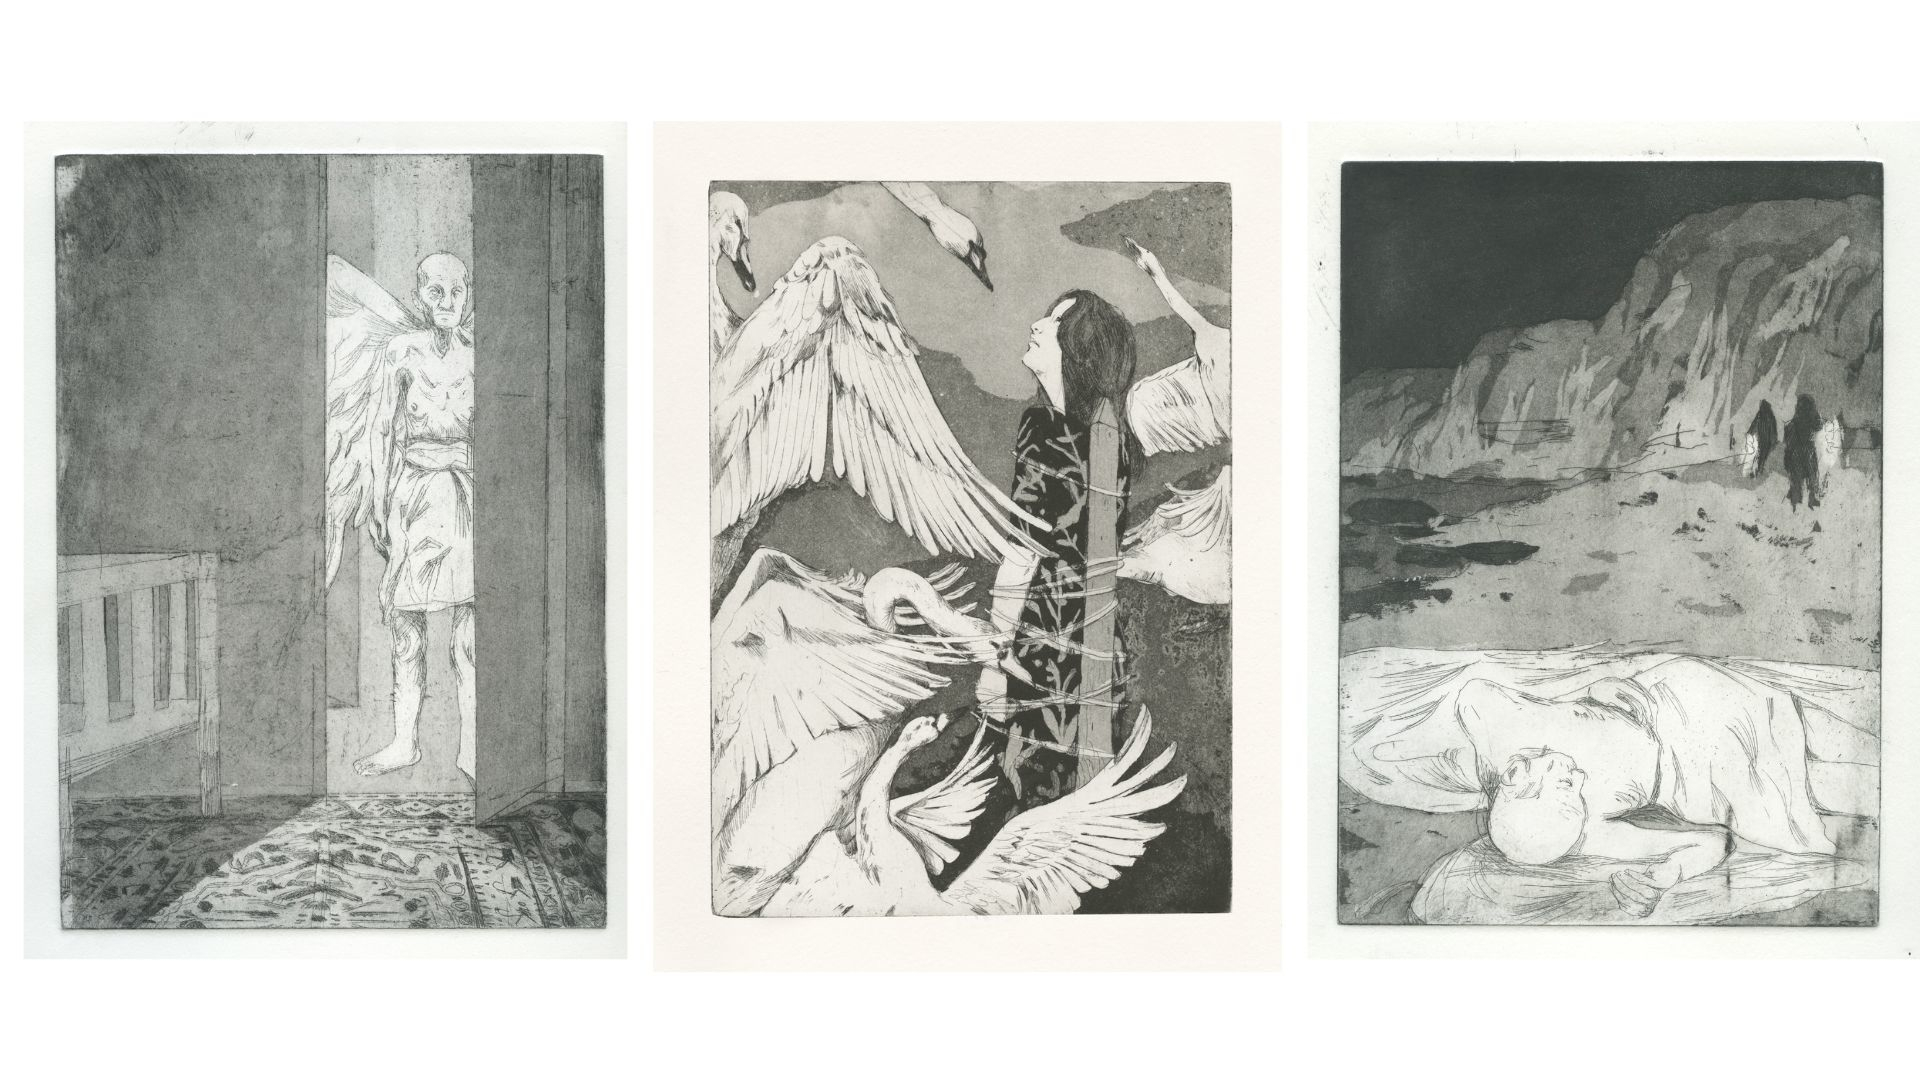 Etching & Aquatint. The prints on each side illustrate two fragments from “A Very Old Man with Enormous Wings” by Gabriel Garcia Marquez while the central image presents the final scene from “The Six Swans” by Grimm Brothers. I created the illustration by etching the images and adding layers of aquatint.